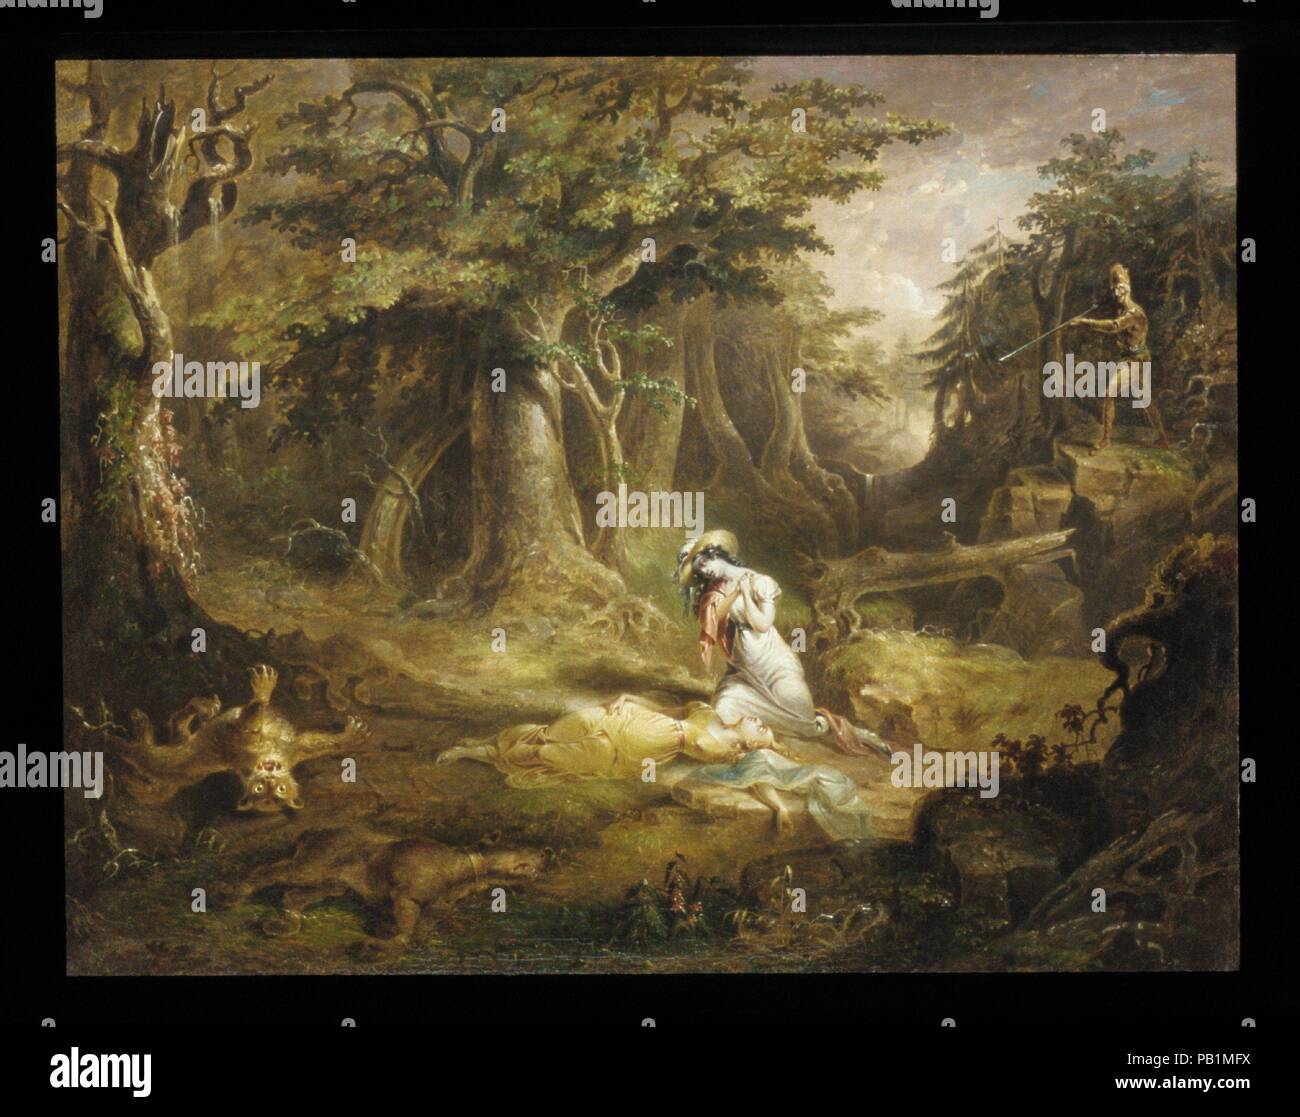 Leatherstocking's Rescue. Artist: John Quidor (1801-1881). Dimensions: 26 x 34 in. (66 x 86.4 cm). Date: 1832.  While better known for his paintings based on the writings of Washington Irving, Quidor also painted scenes from the popular novels of James Fenimore Cooper. In this episode from The Pioneers (1823), the woodsman Natty Bumppo, also known as Leatherstocking, rescues two comely young women from a female panther, which, in protecting her cub, destroyed their dog and then turned, threateningly, to them. Quidor enhanced the fantastic and horrific aspects of the story in the highly stylize Stock Photo